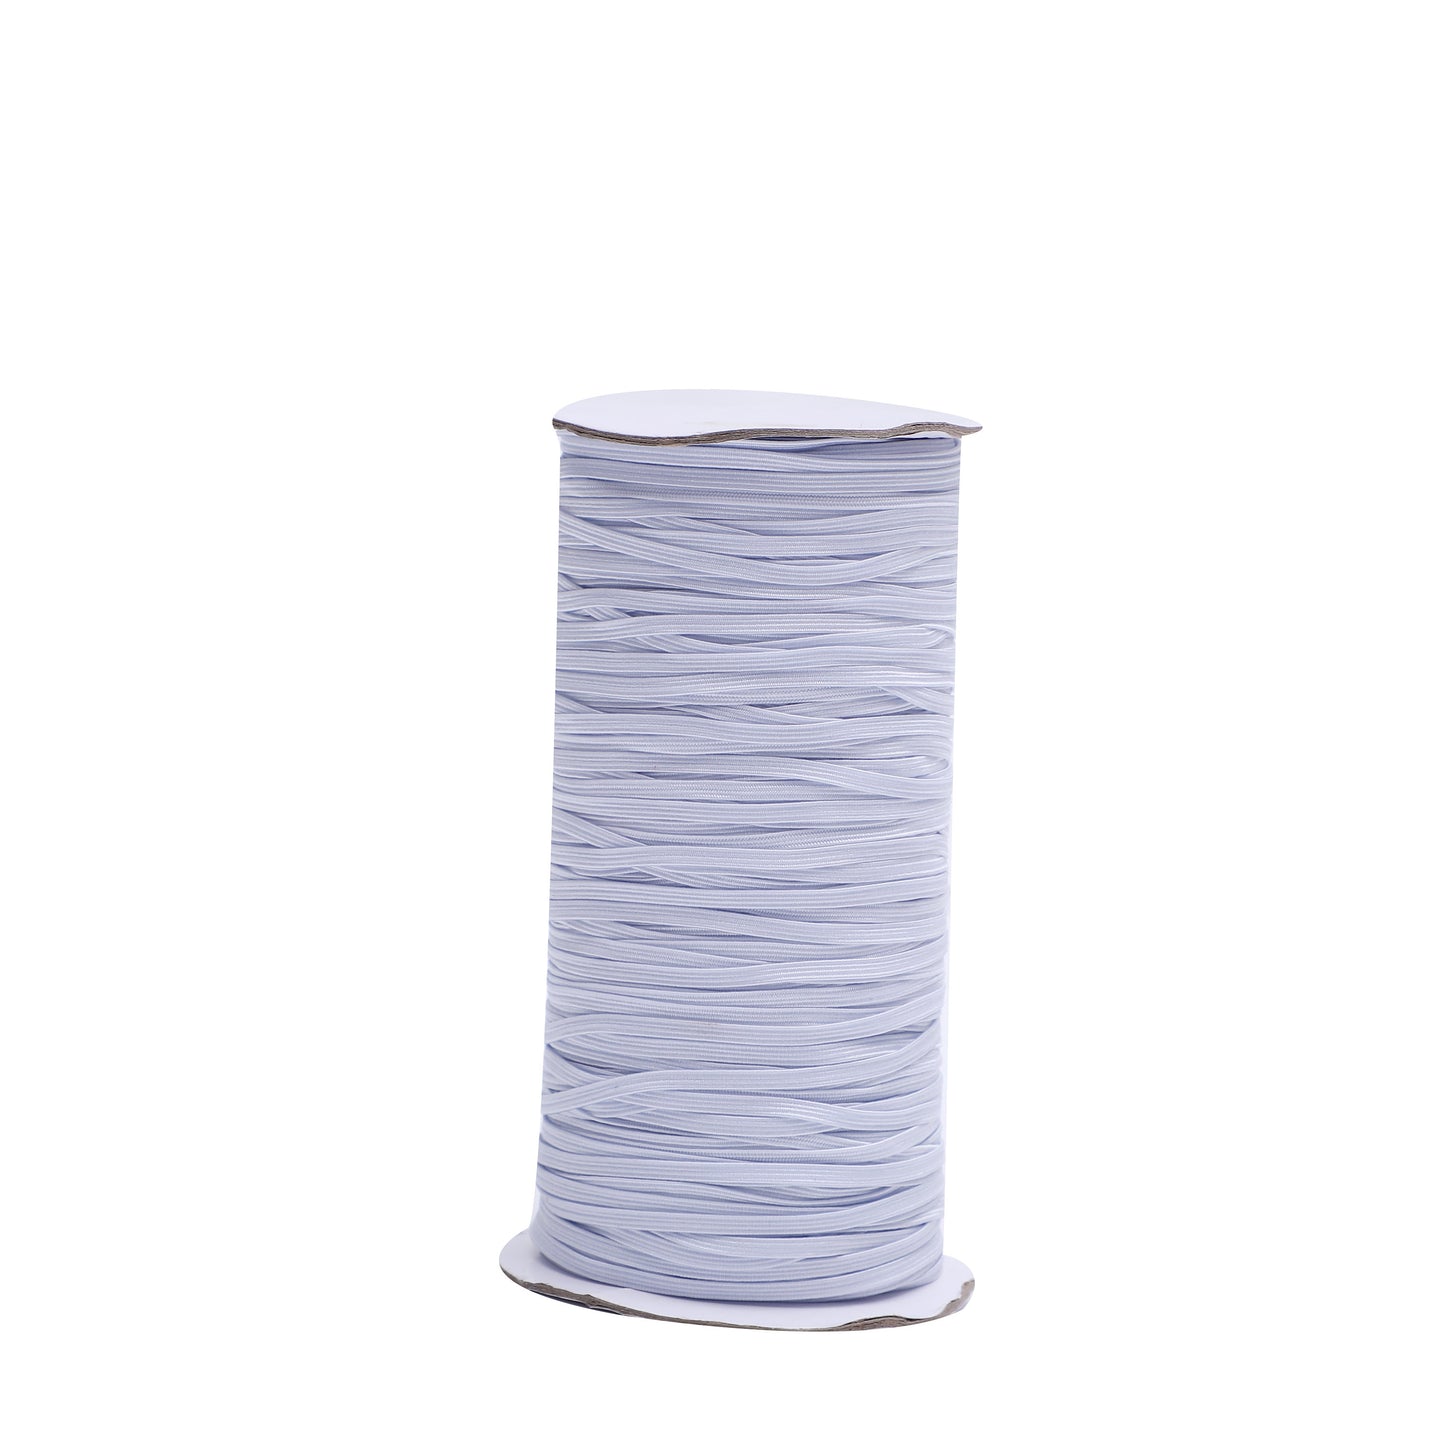 White 1/8 inch Elastic Roll - Elastic for Face Mask - Skinny Elastic - Elastic by the yard Thin Elastic for Face Mask 3 mm Rope Cord